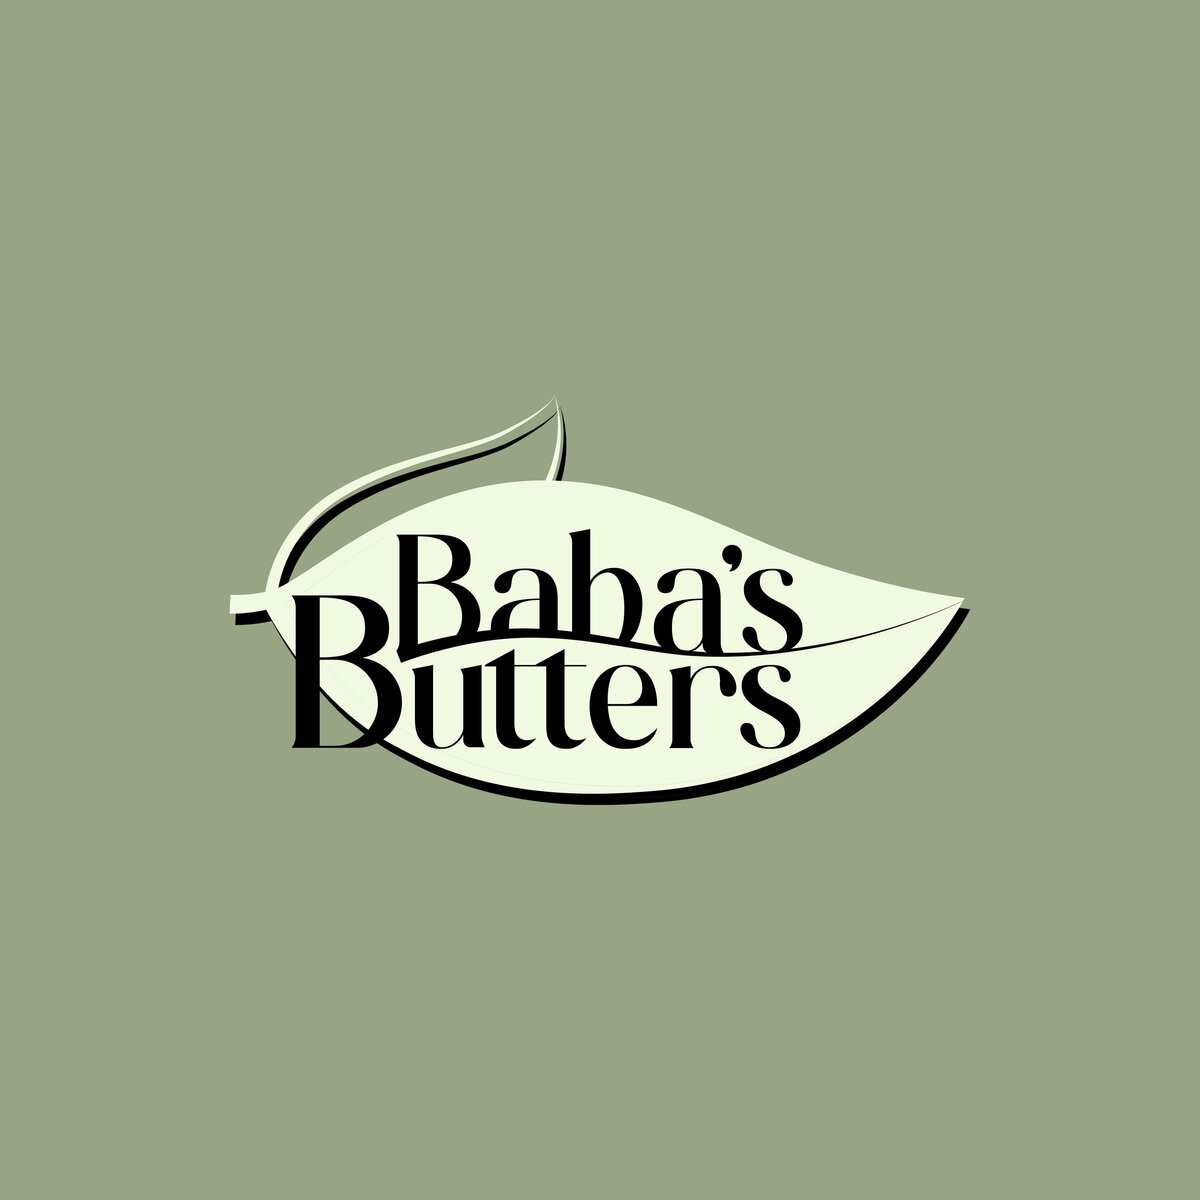 Babas Butters logo